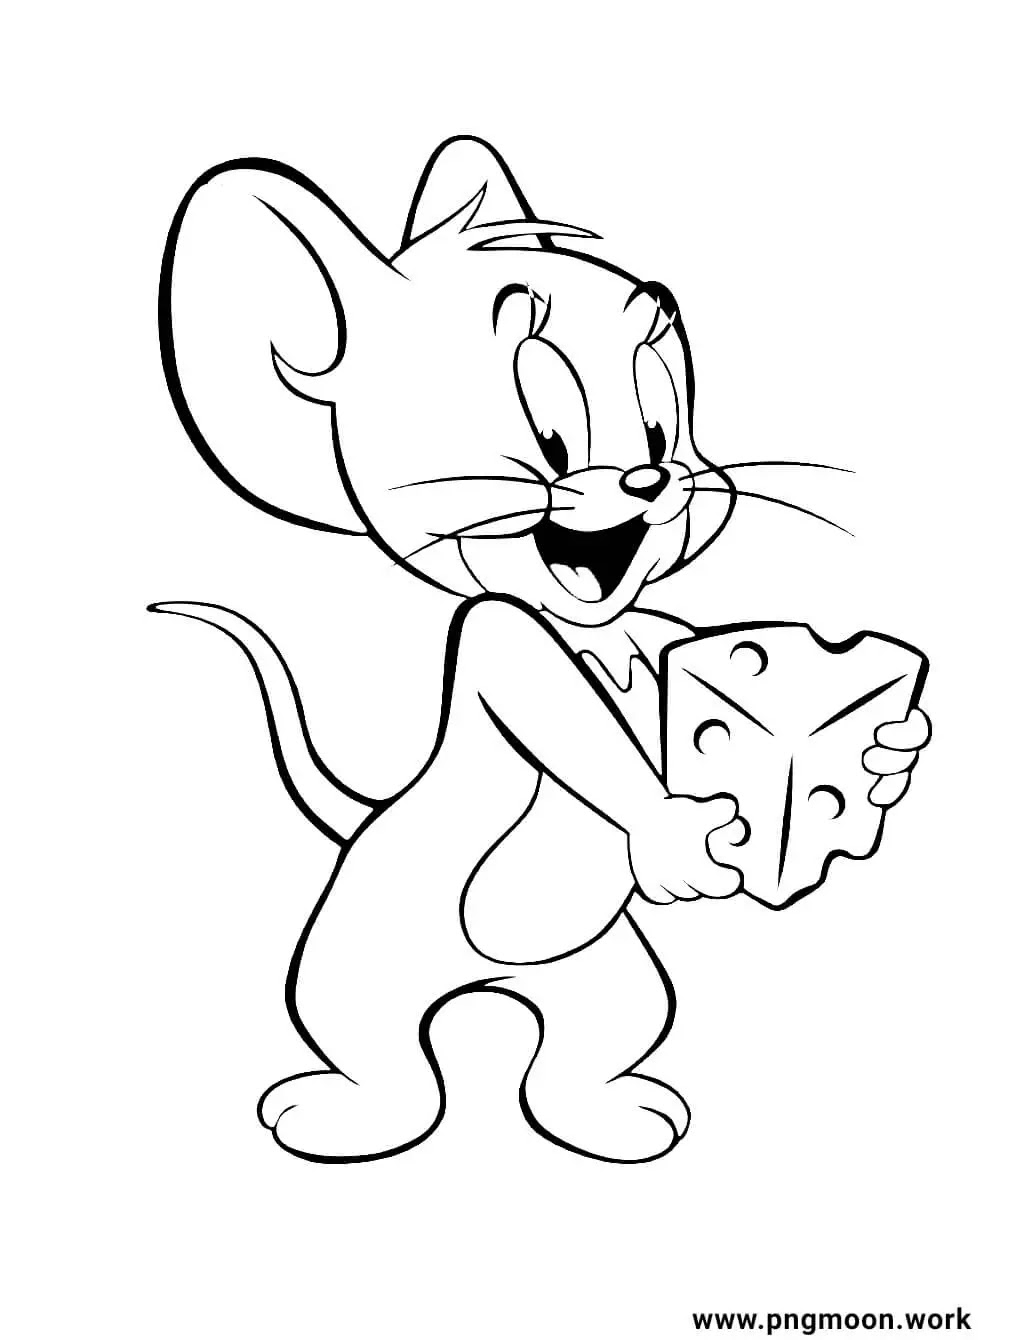 Tom and Jerry Coloring Pages - Pngmoon- PNG images, Coloring Pages